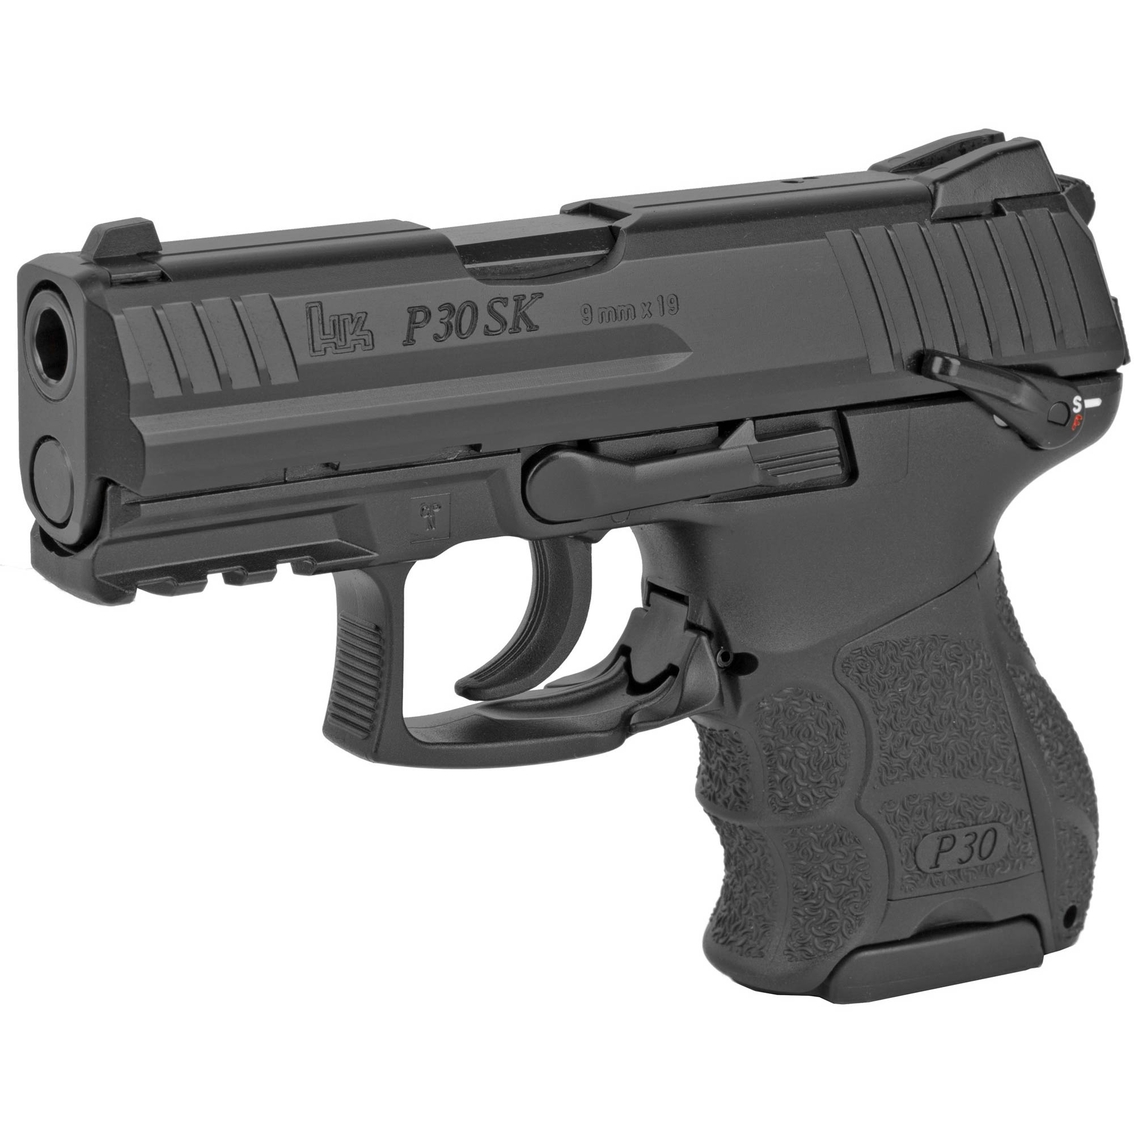 HK P30SK V3 9MM 3.27 in. Semi Automatic Barrel with V3 Trigger 10 Rounds Pistol - Image 3 of 3